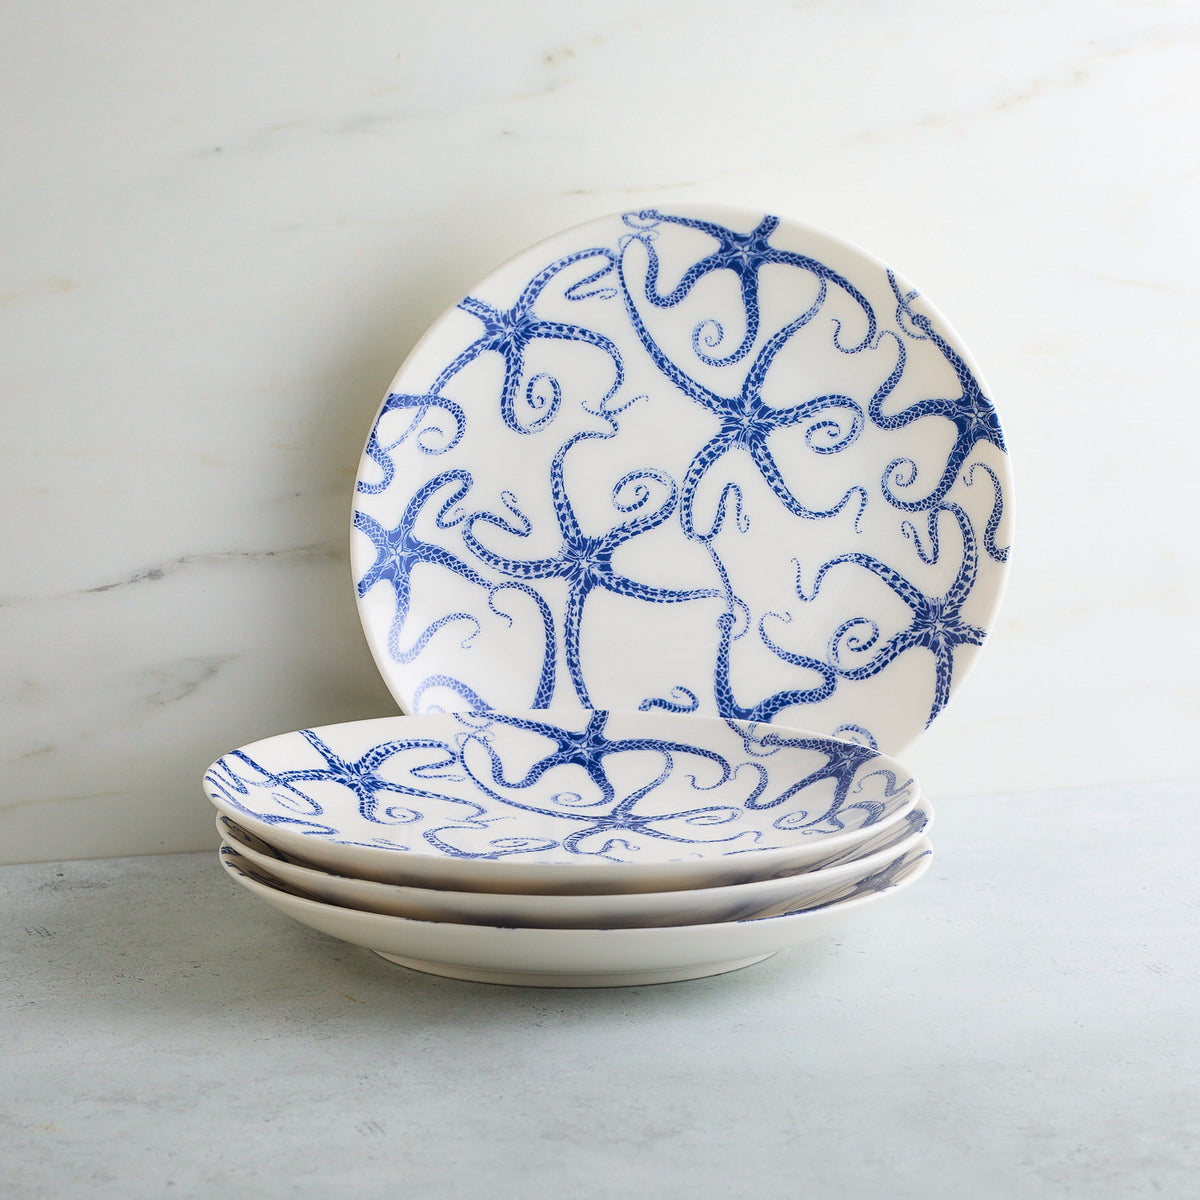 A stack of Caskata Artisanal Home Starfish Coupe Salad Plates adorned with blue starfish designs against a light background.